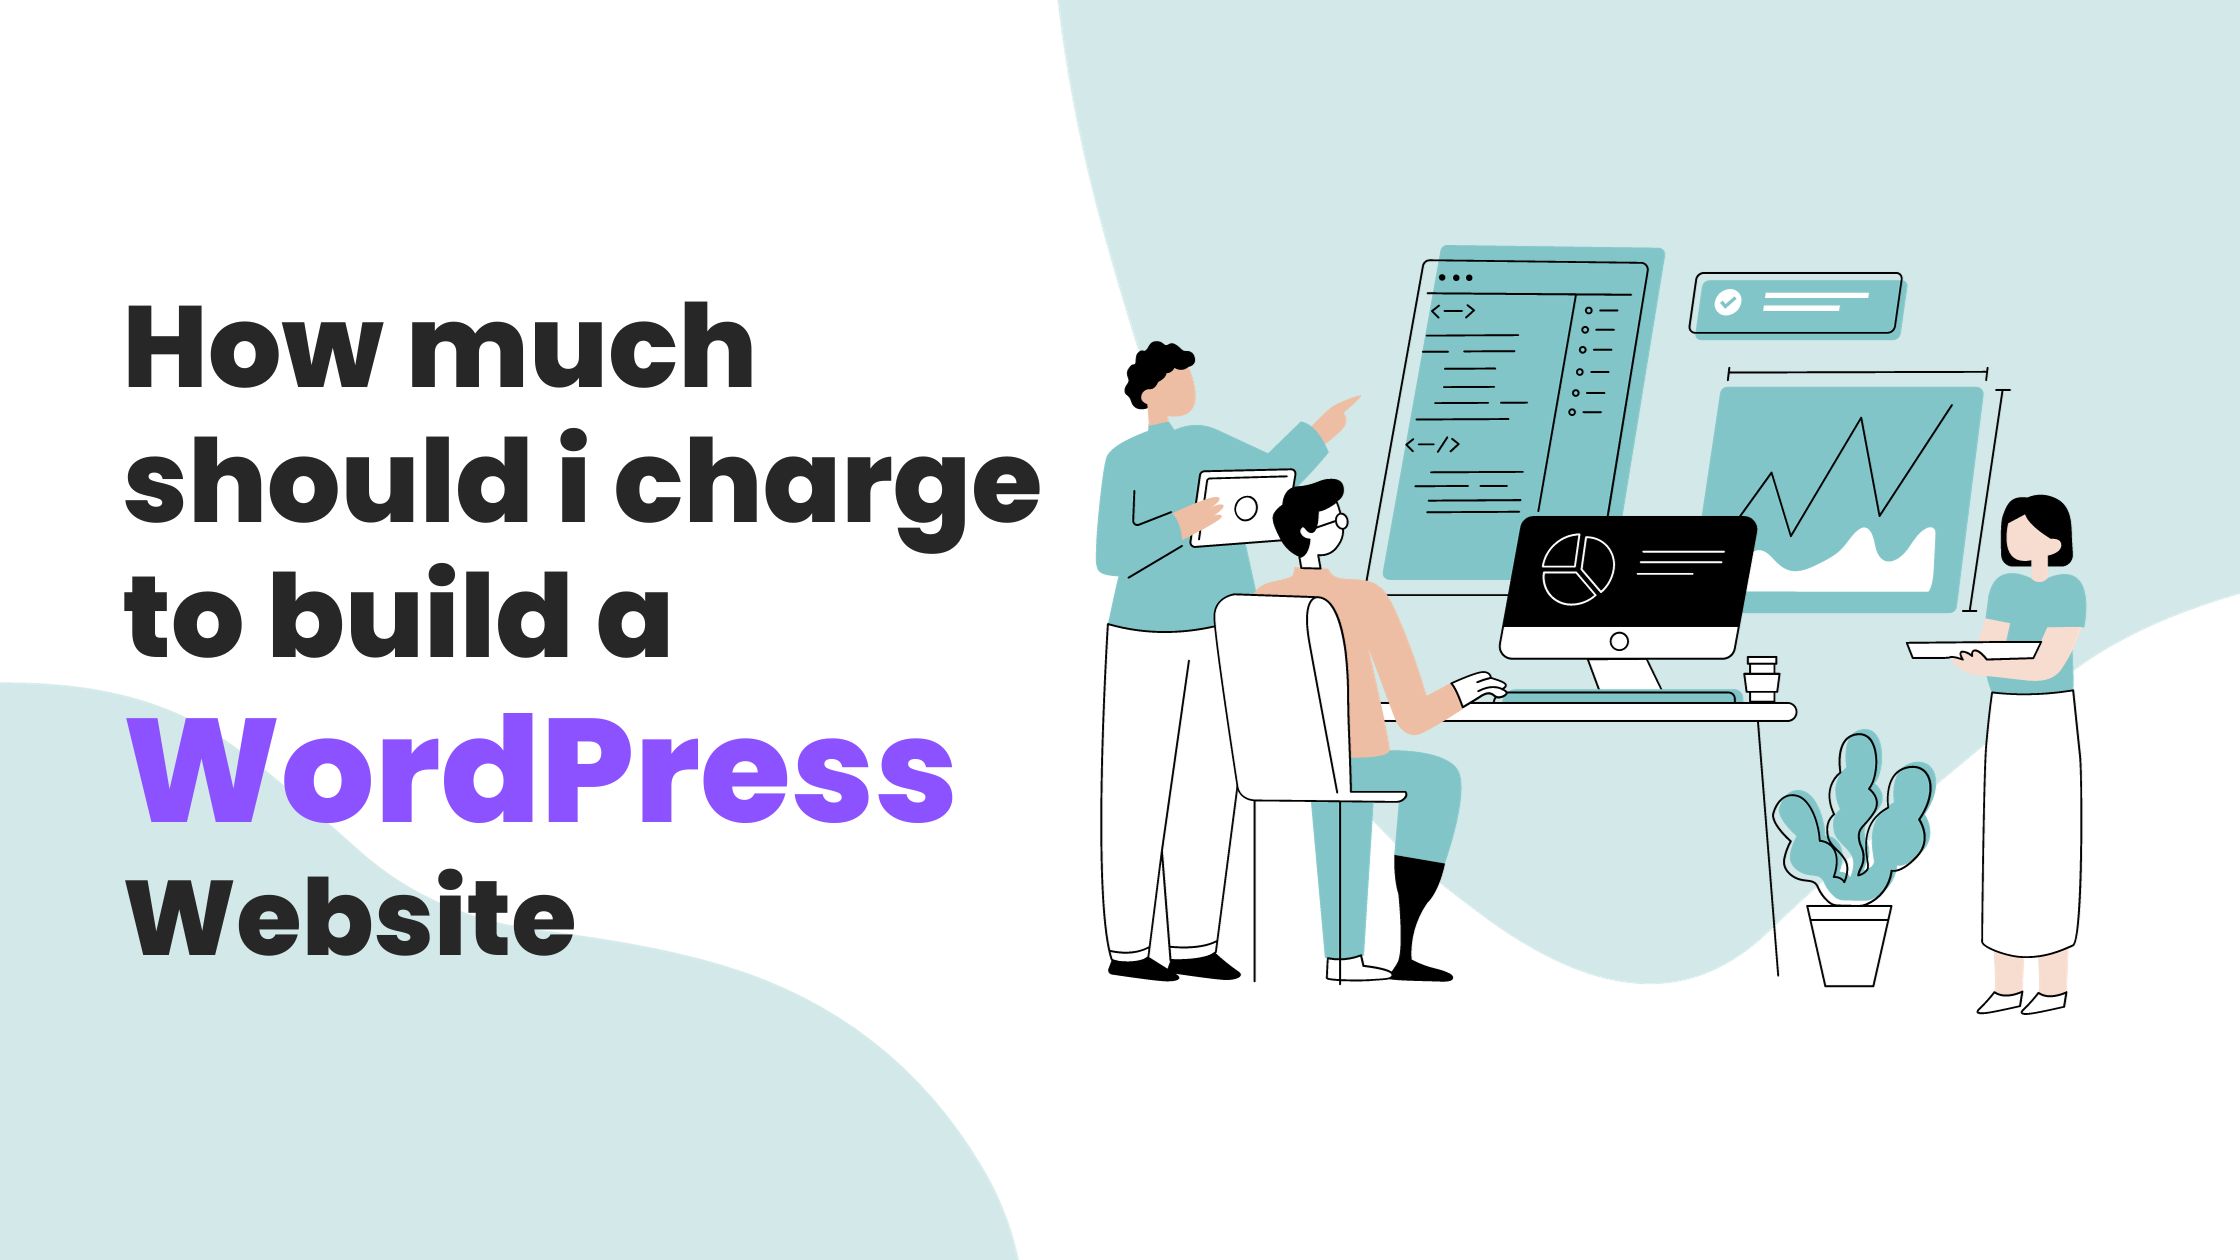 How much should i charge to build a WordPress Website